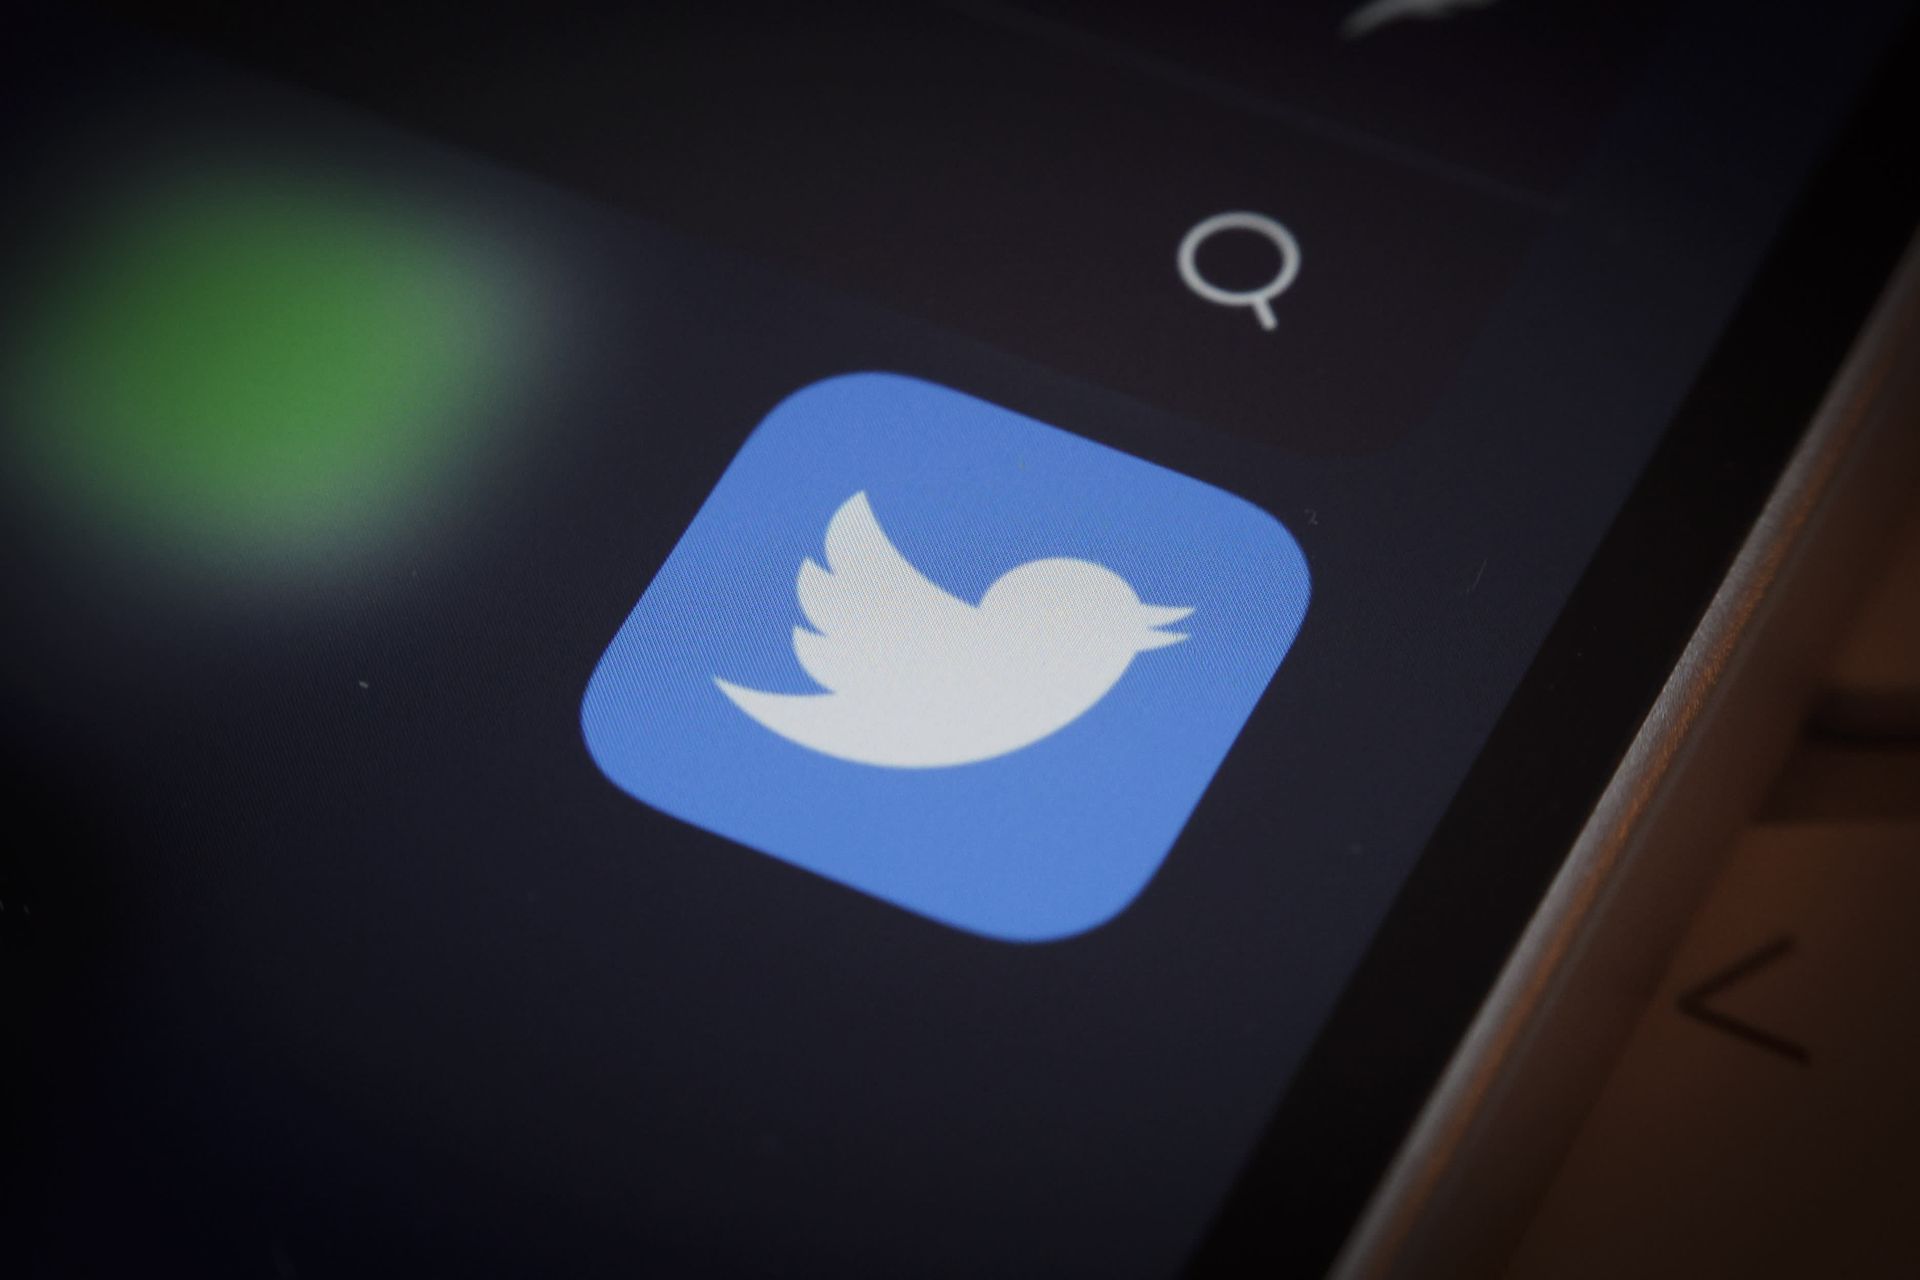 Twitter offices closed: Is Twitter shutting down?